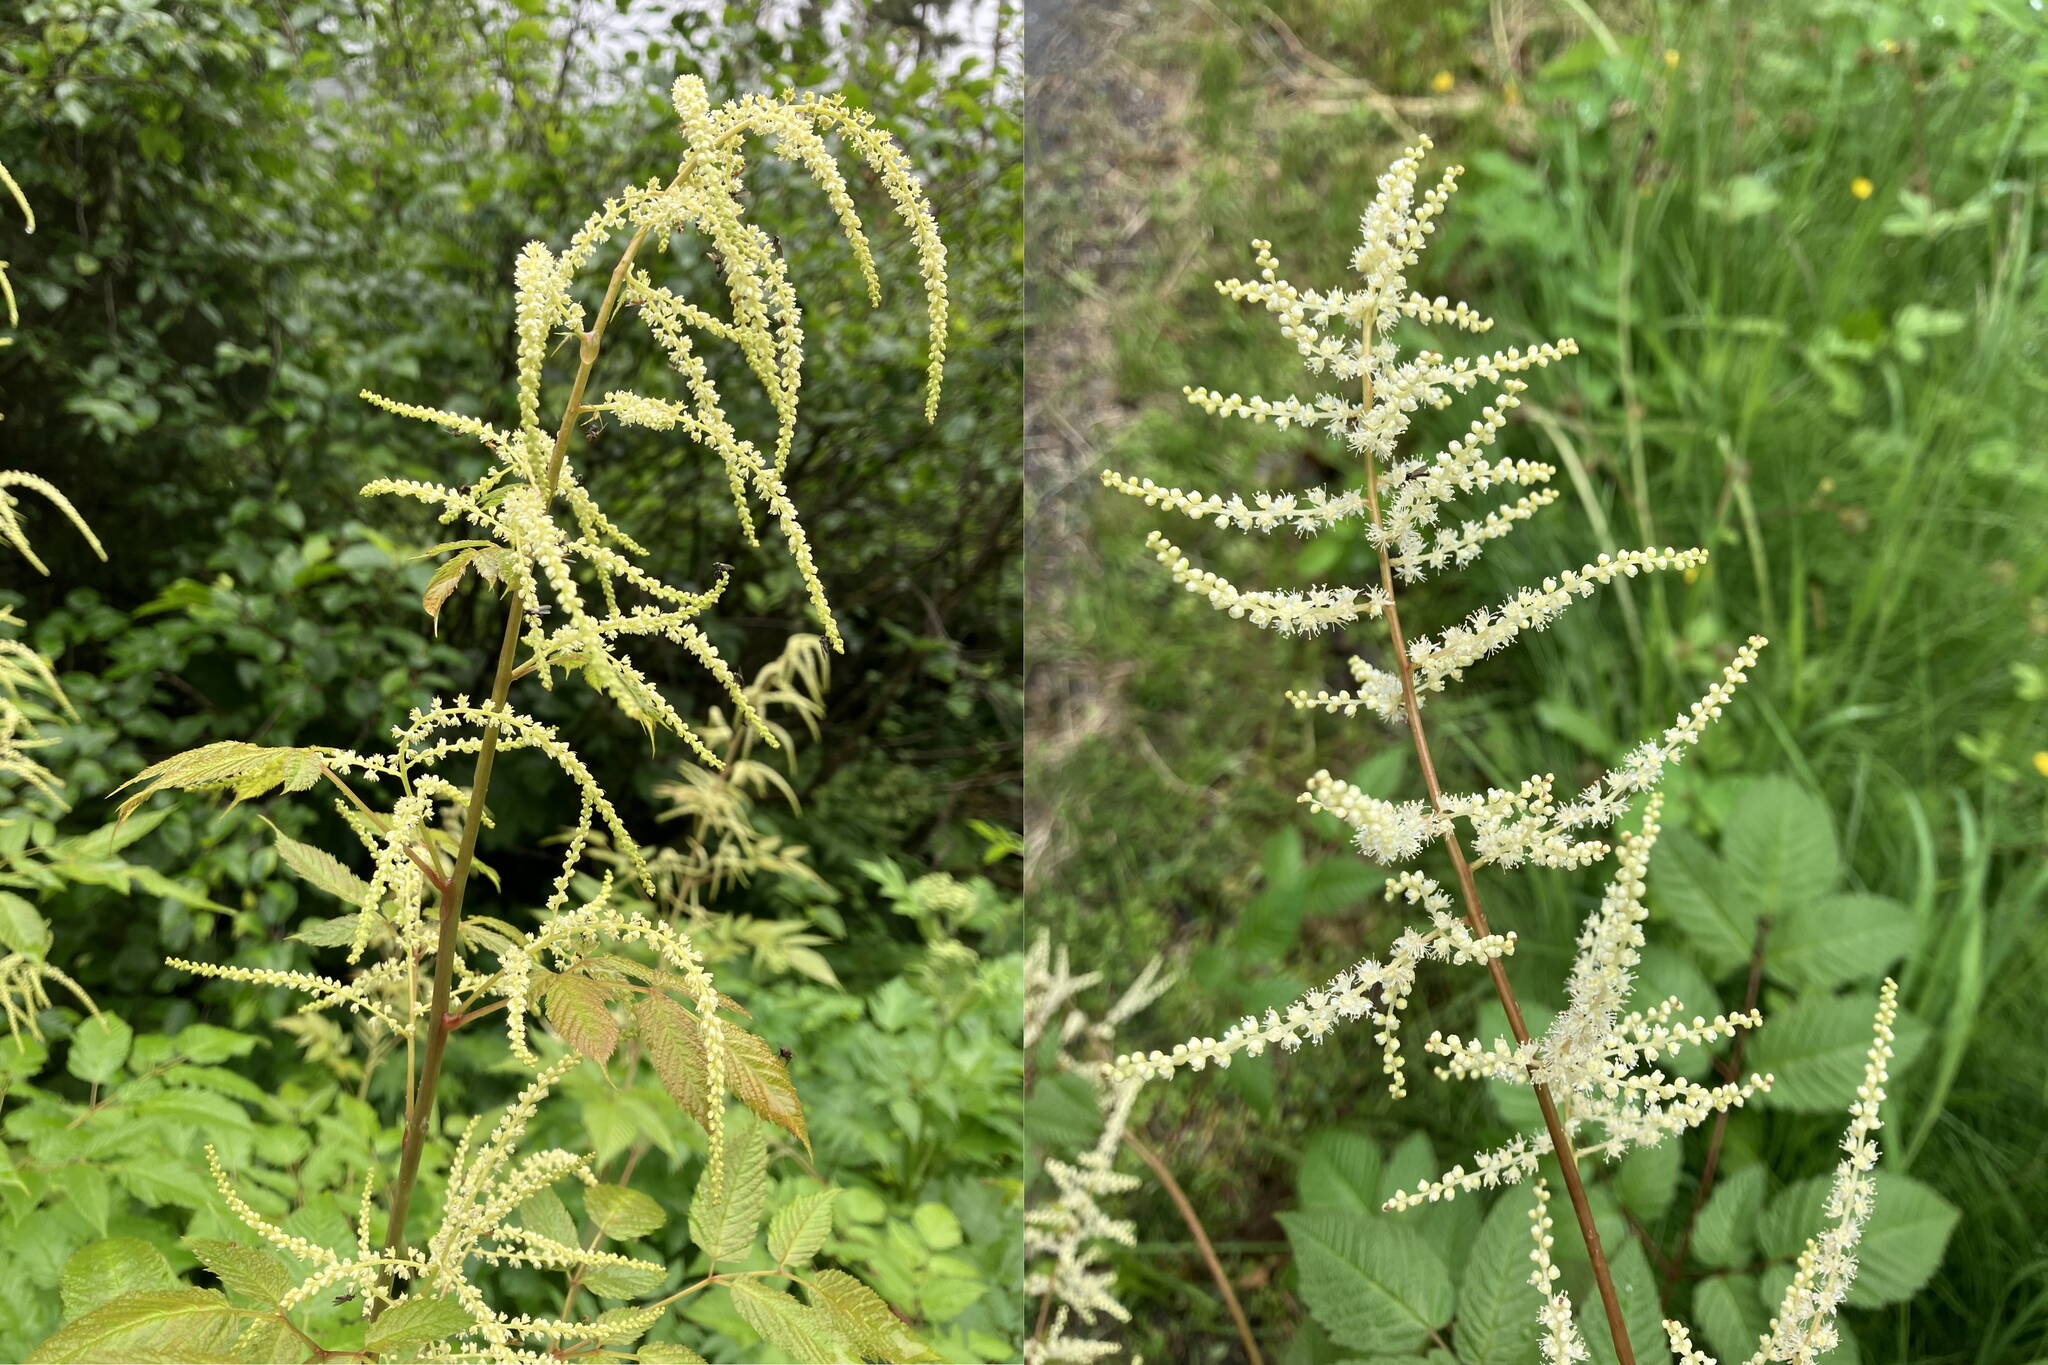 Female goatsbeard flowers, left, are less conspicuous, so the inflorescence is less decorative. Male goatsbeard flowers, right, have visible stamens and slightly larger petals than females, making the inflorescence showy. (Photos by Mary F. Willson)